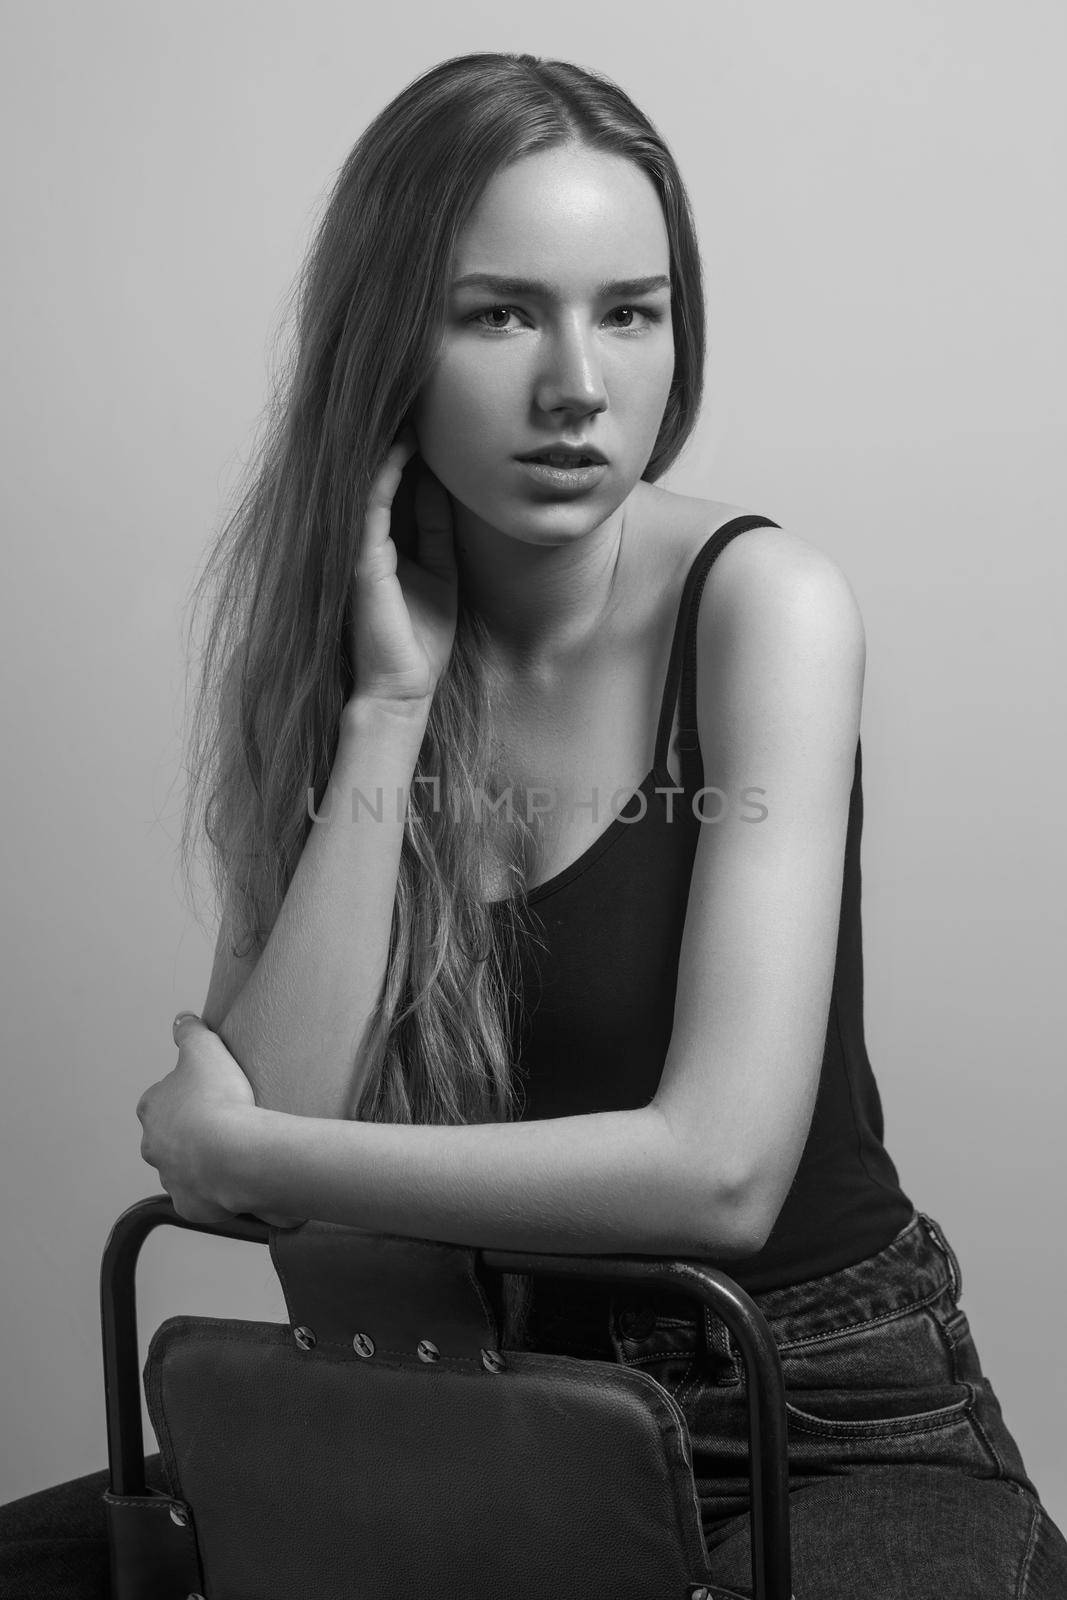 Beautiful woman sit on chair and touching her long hair. Studio shot, isolated on gray background